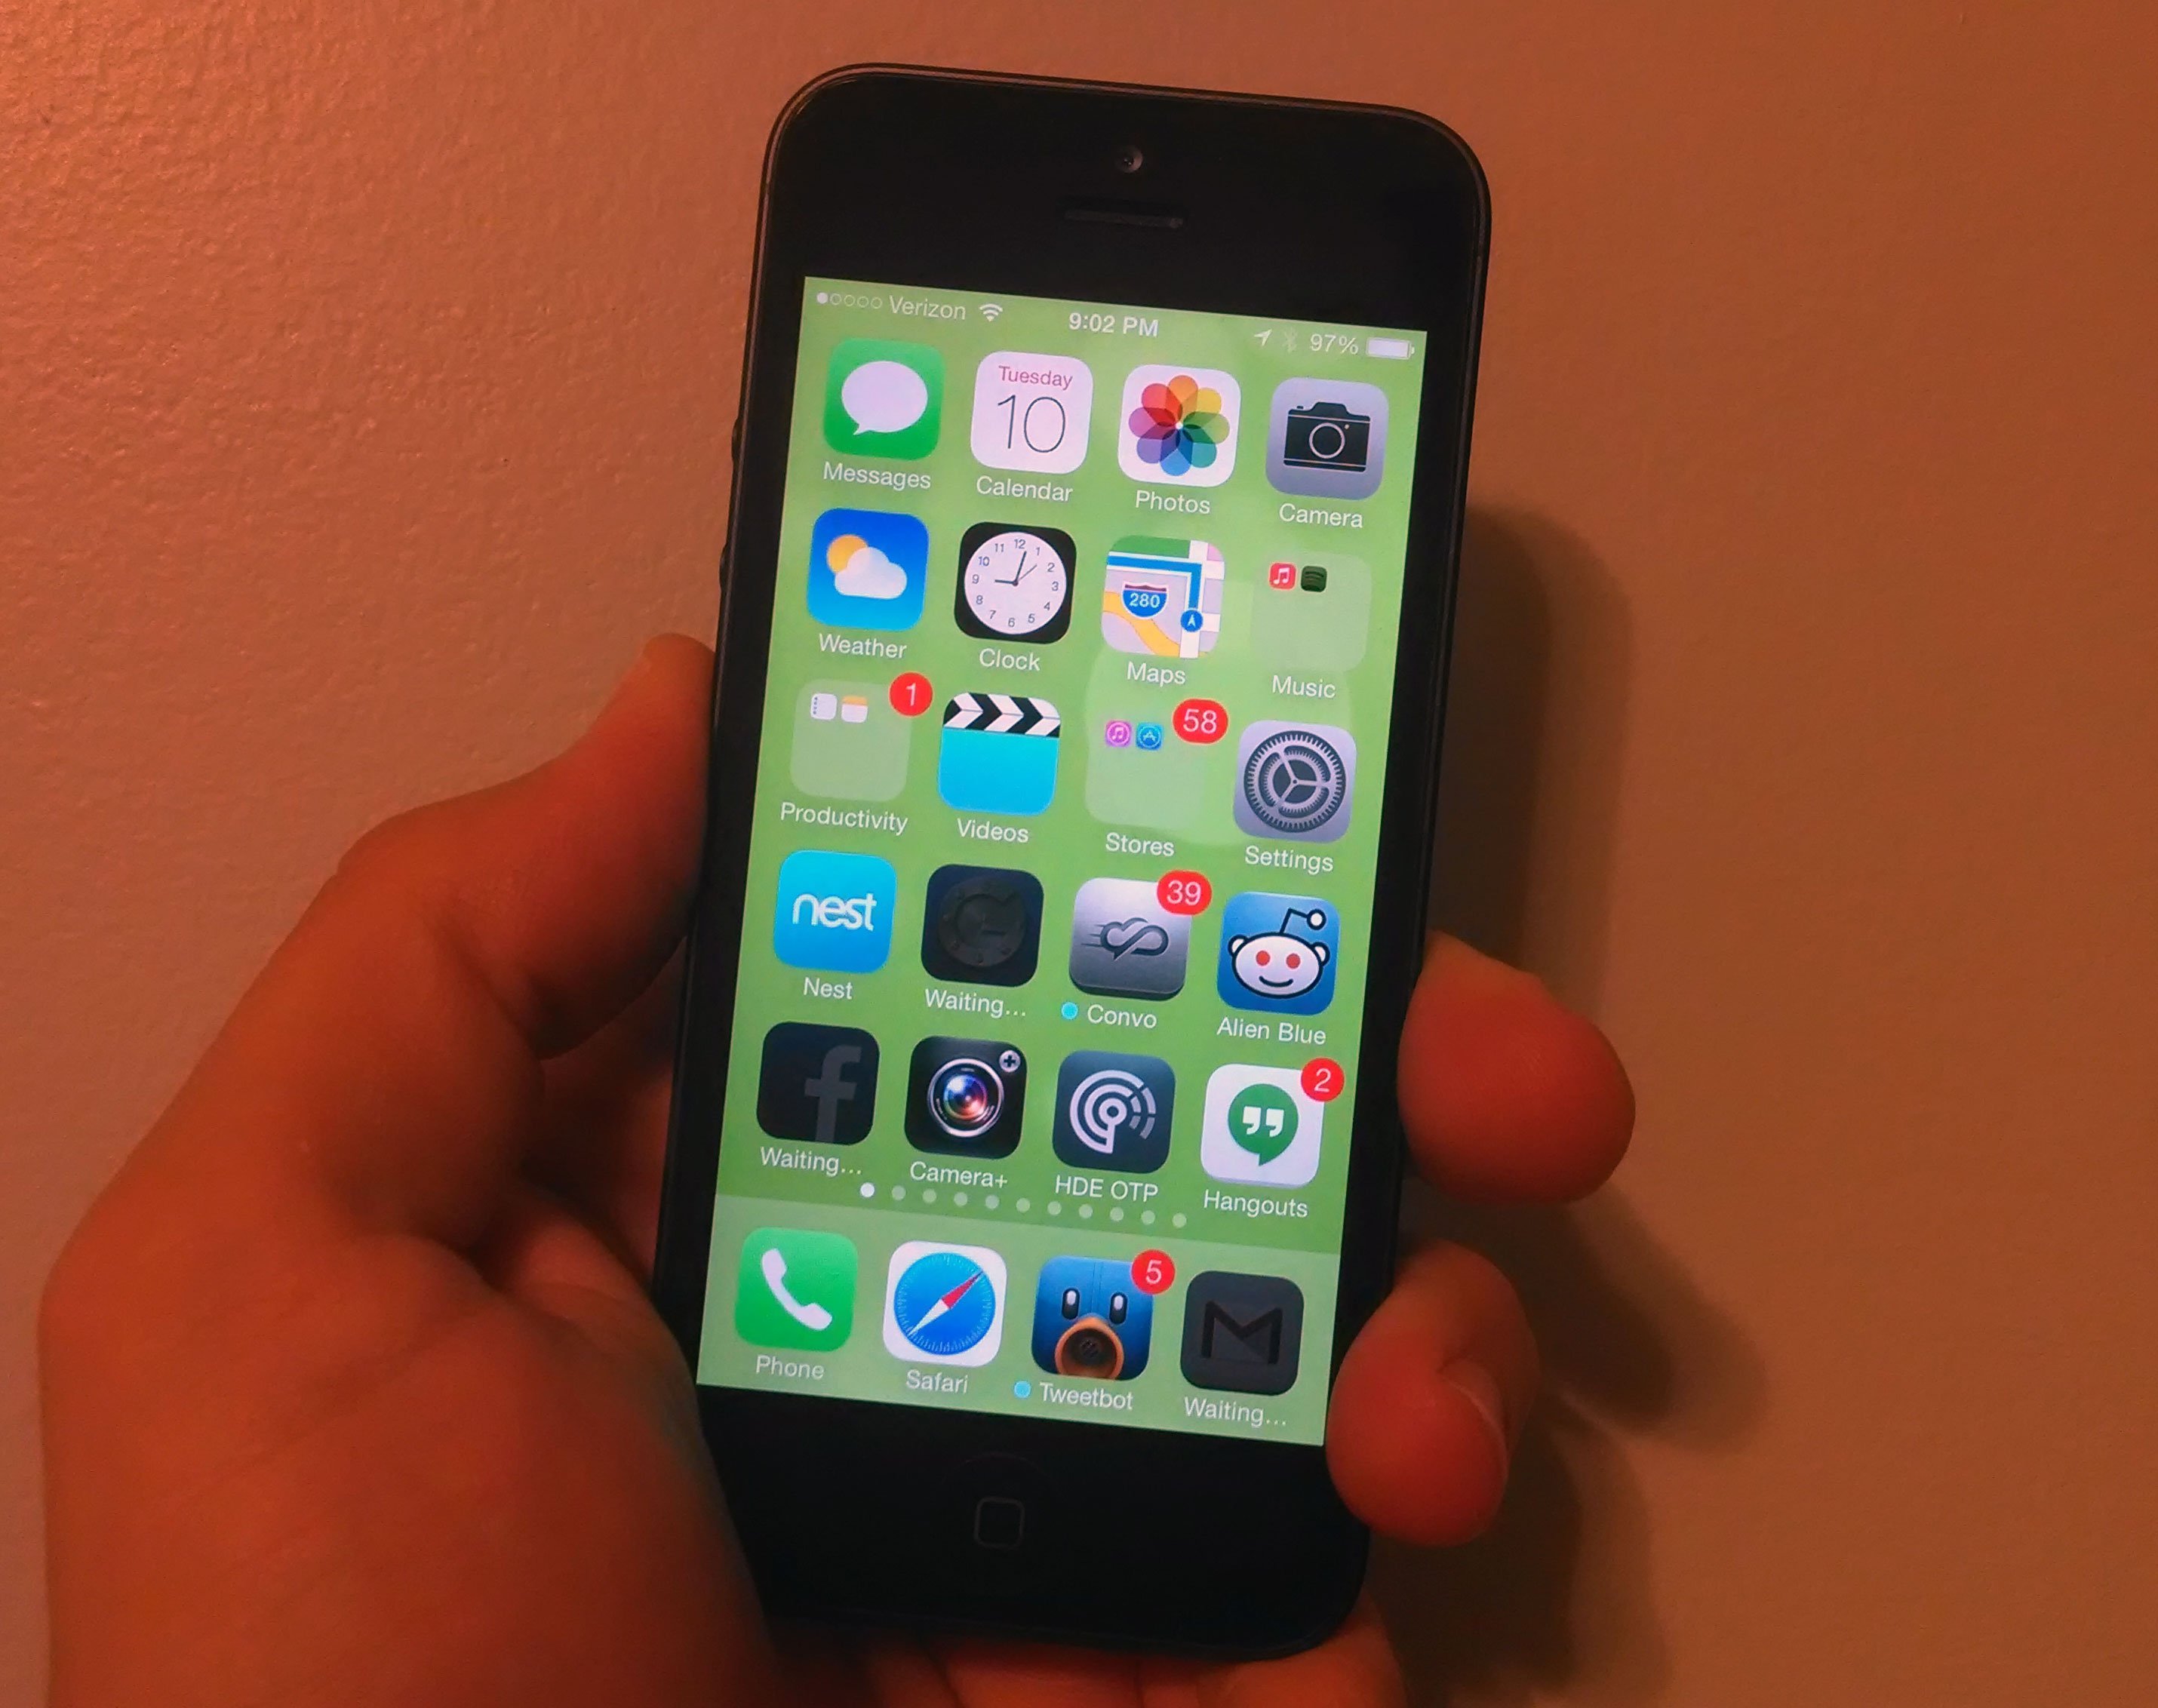 The iOS 7 GM download lets anyone with a supported device install IOS 7 early.